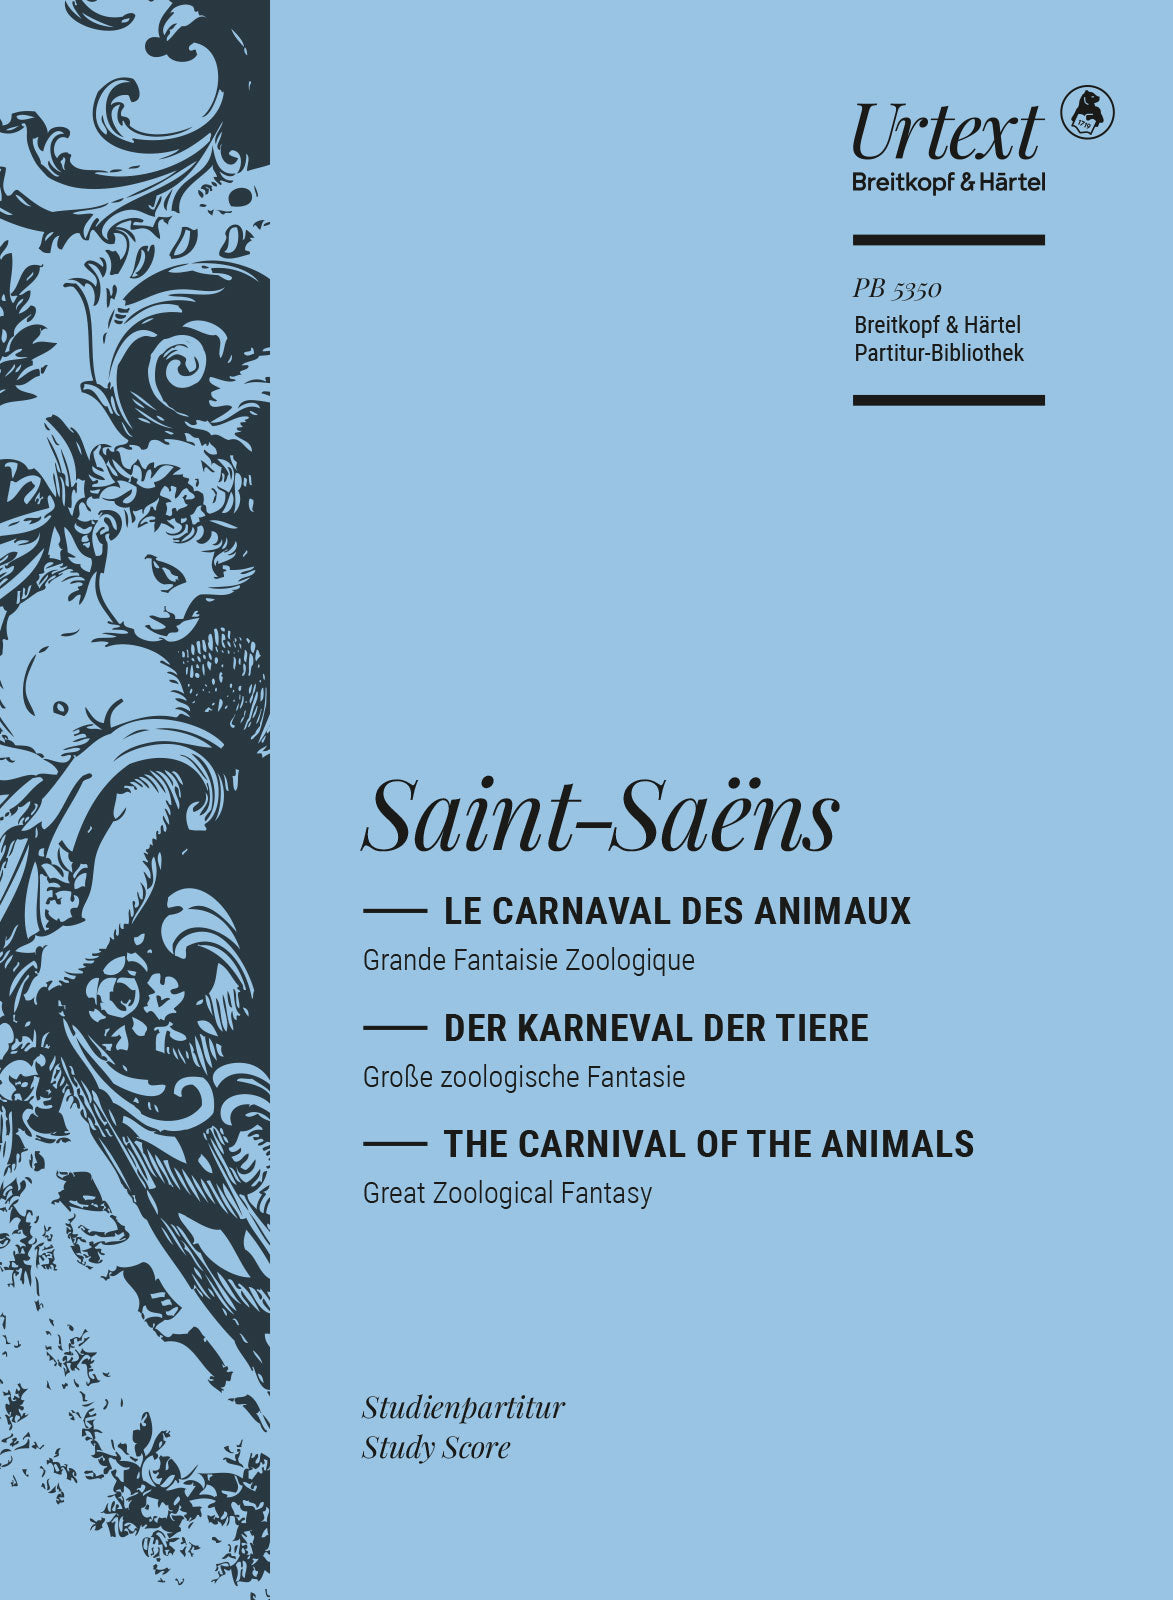 Camille Saint-Saëns – The Carnival Of The Animals, Le Carnaval des